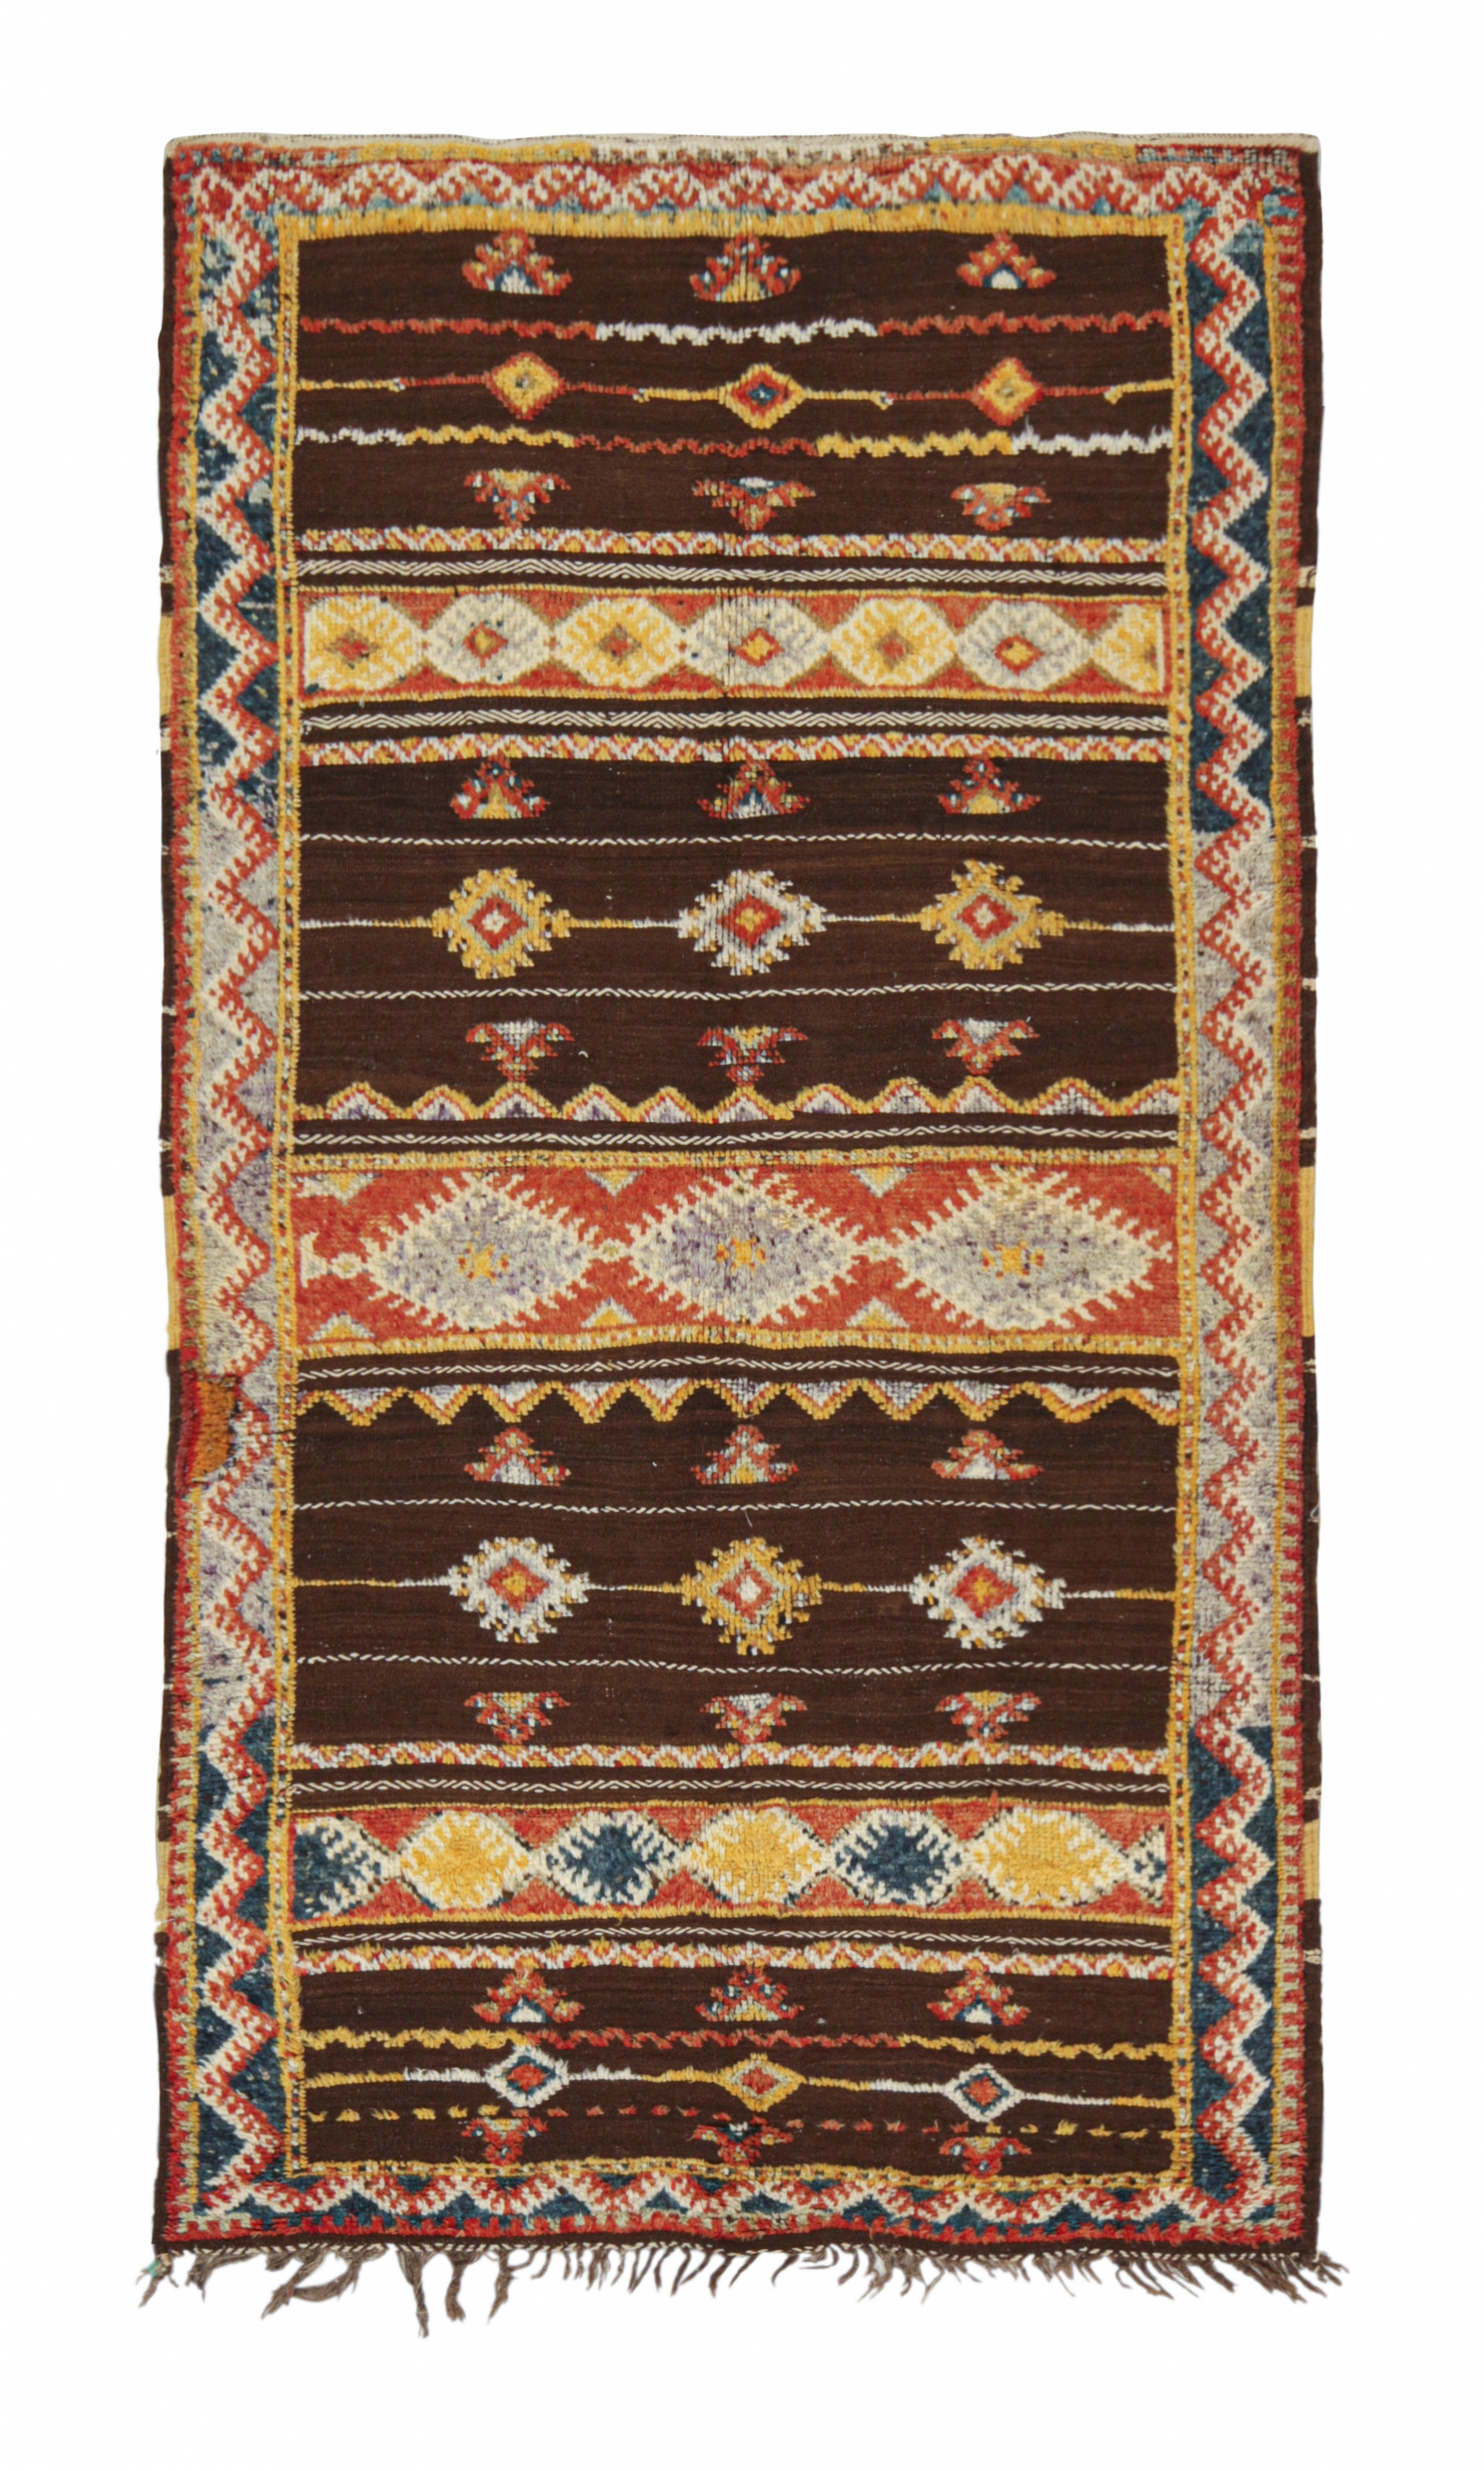 Vintage Moroccan Kilim rug in Brown with Geometric Patterns For Sale